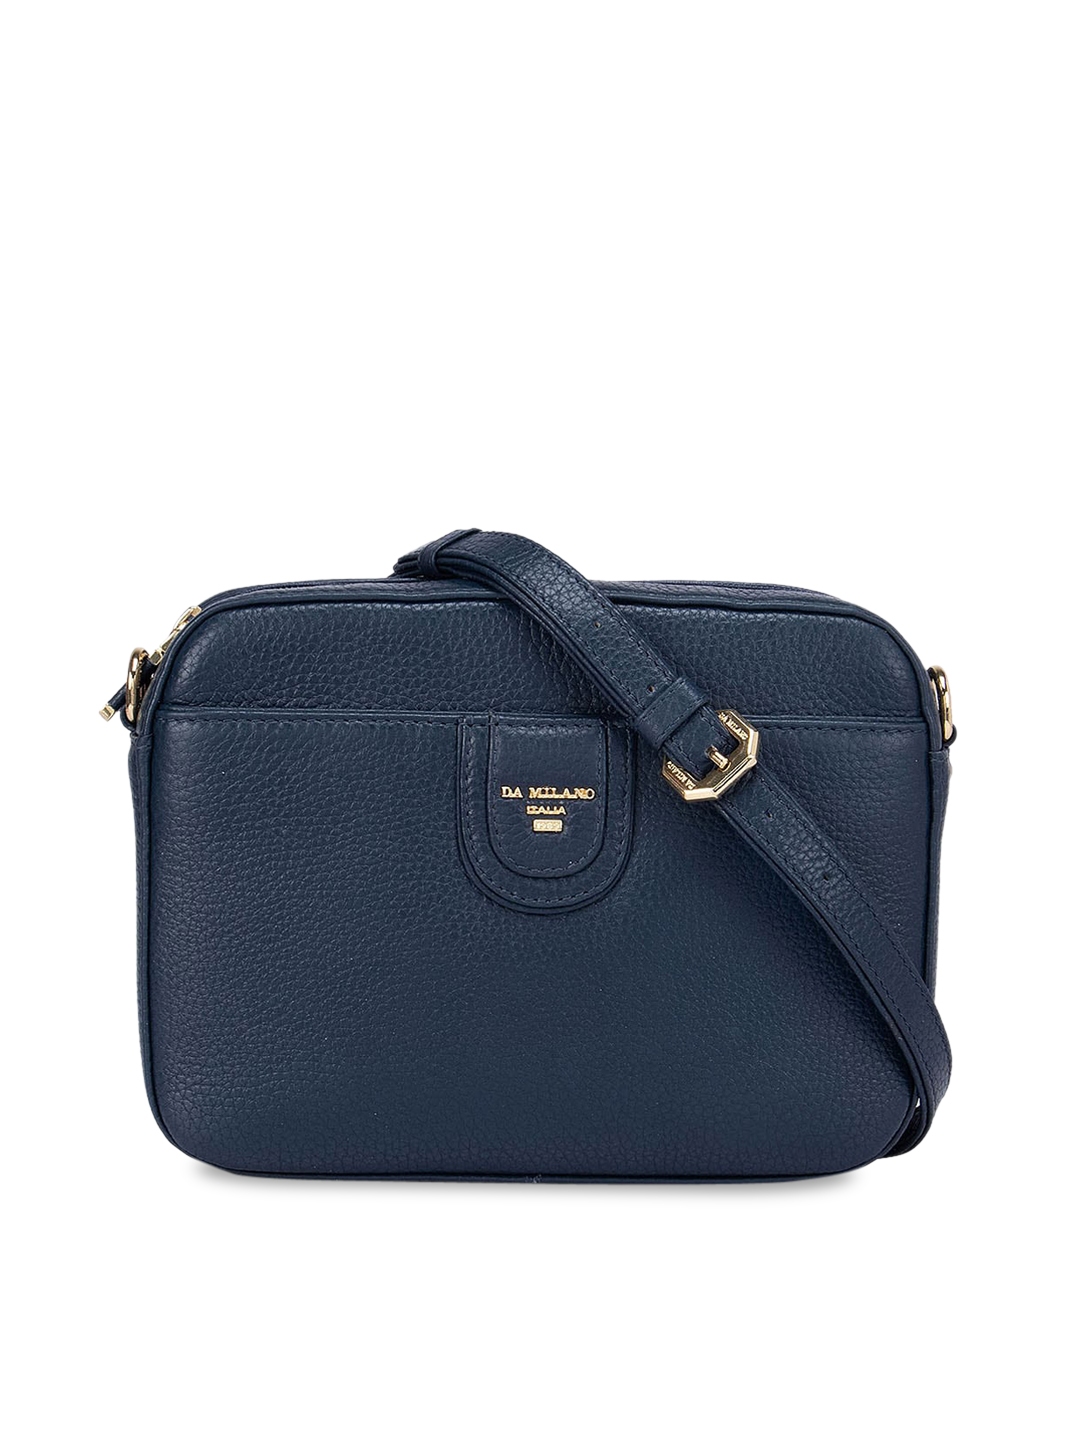 Buy Da Milano Blue Leather Structured Sling Bag With Quilted - Handbags ...